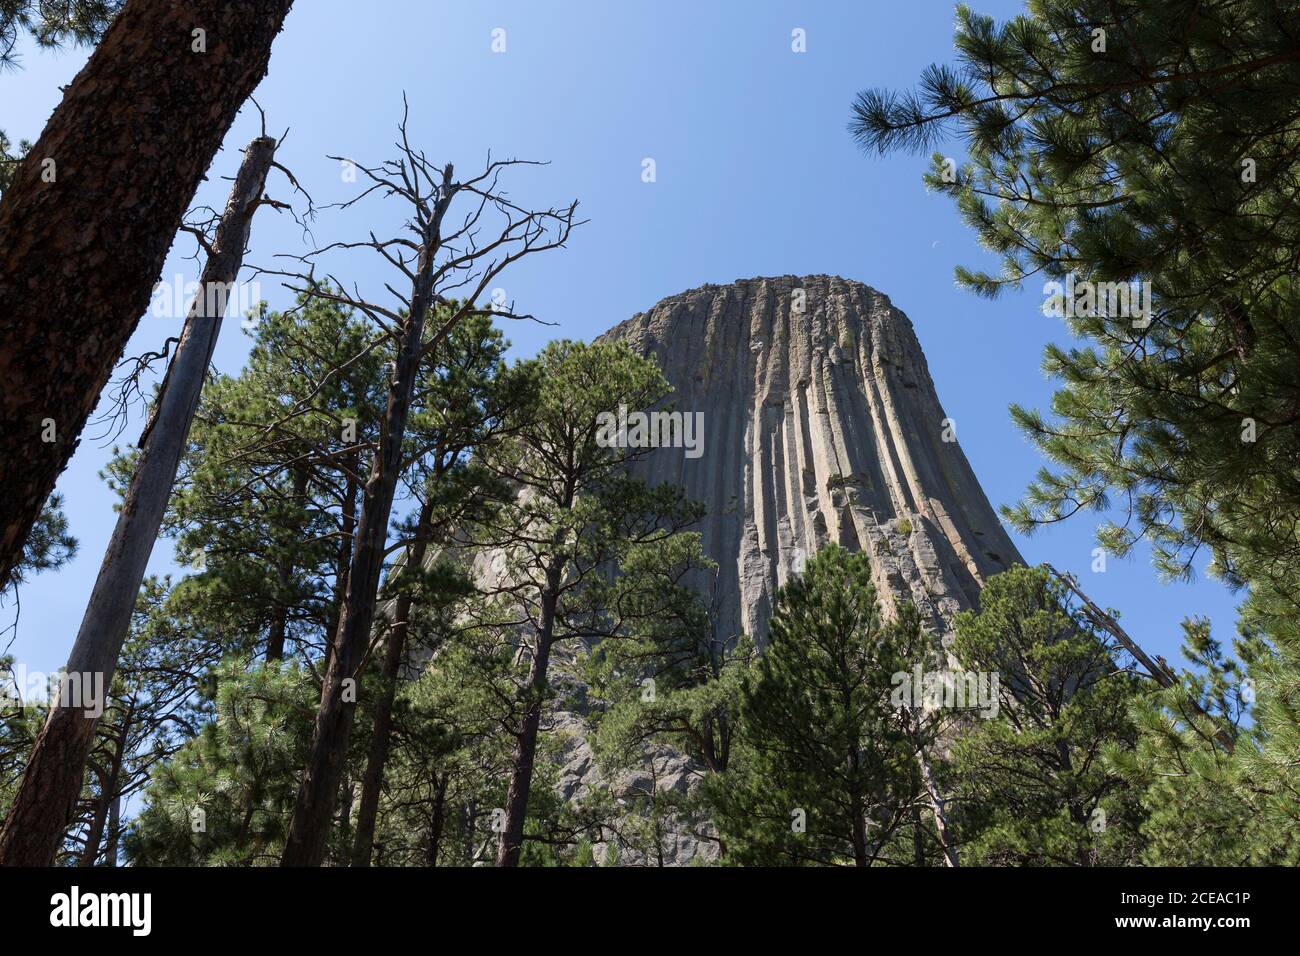 A view of the east side of the tower from Tower Trail at Devils Tower National Monument, Wyoming on Friday, August 14, 2020. Stock Photo